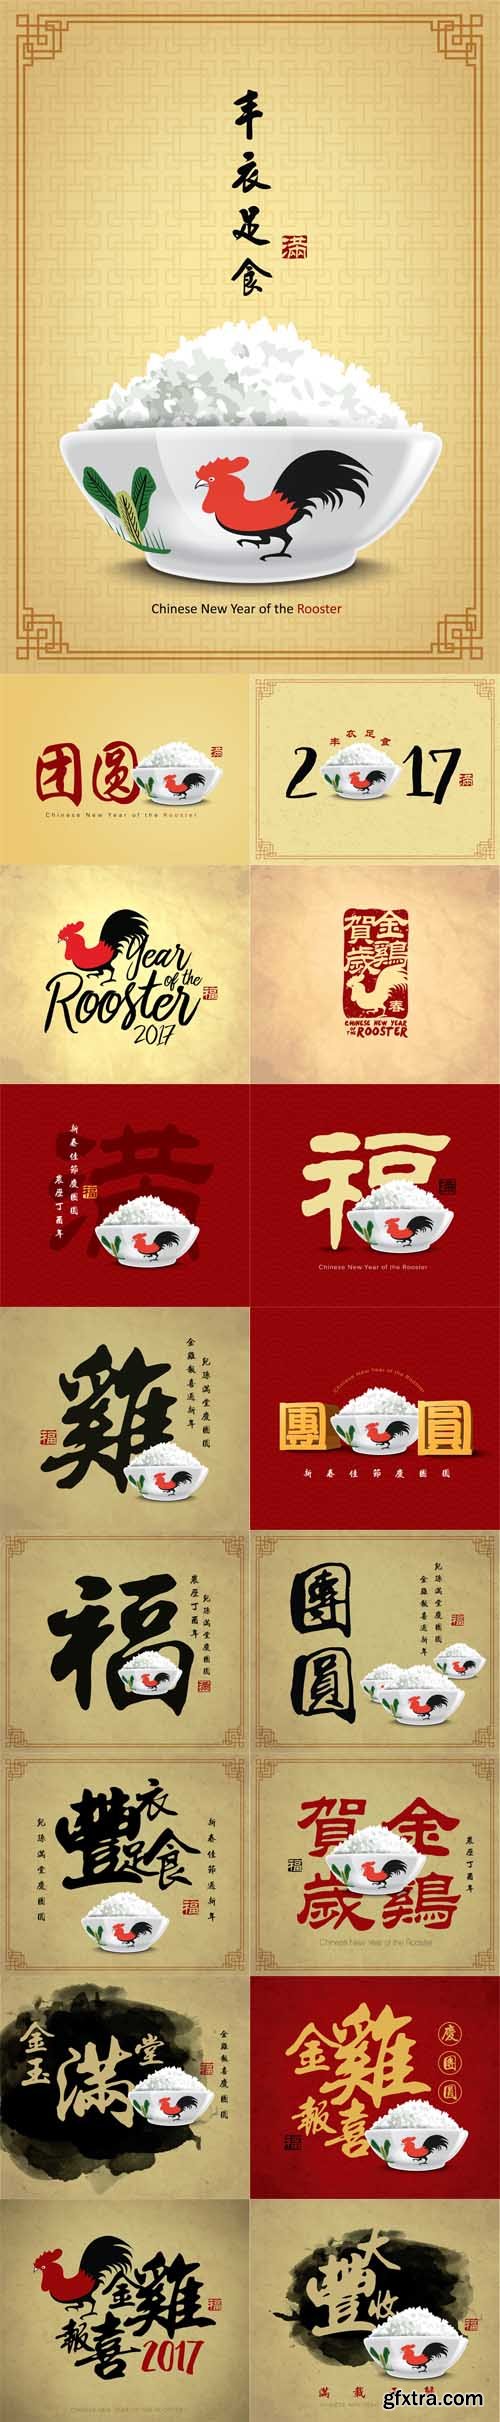 Vector Set - Chinese New Year Card Design with Rooster Bowl, 2017 Year